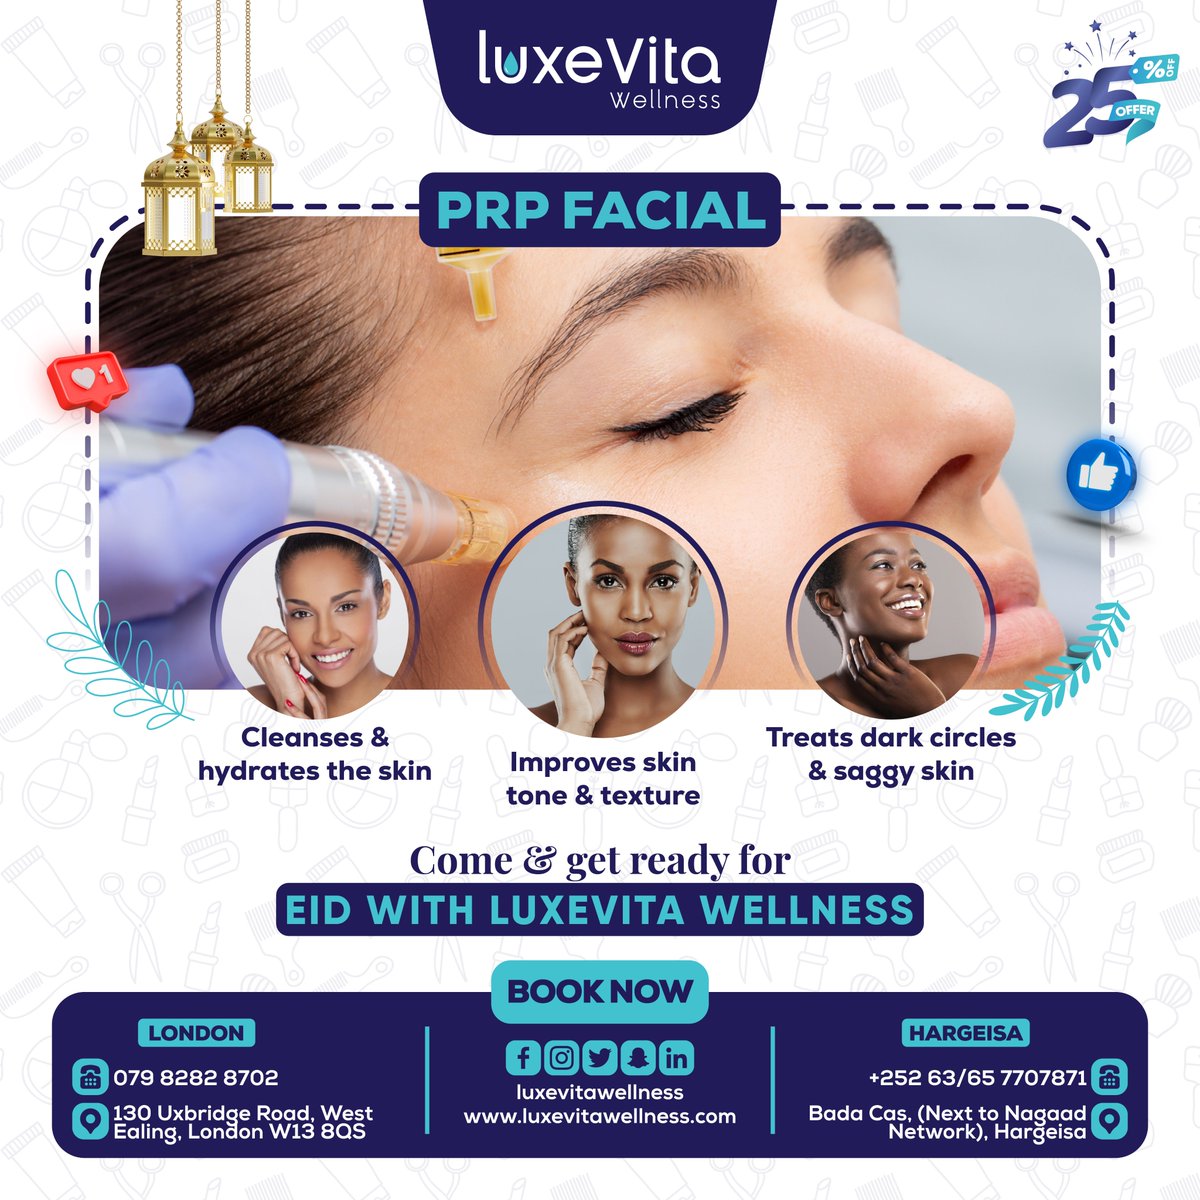 PRP Facial helps to naturally improve your skin's appearance without any chemicals and cleanses/hydrates your skin.
🗓️ Book your appointment today!
-
#luxevitawellness #london #hargeisa #prpfacial #plateletrichplasma #skinrejuvenation #antiaging #naturalbeauty #skincare #selfcare